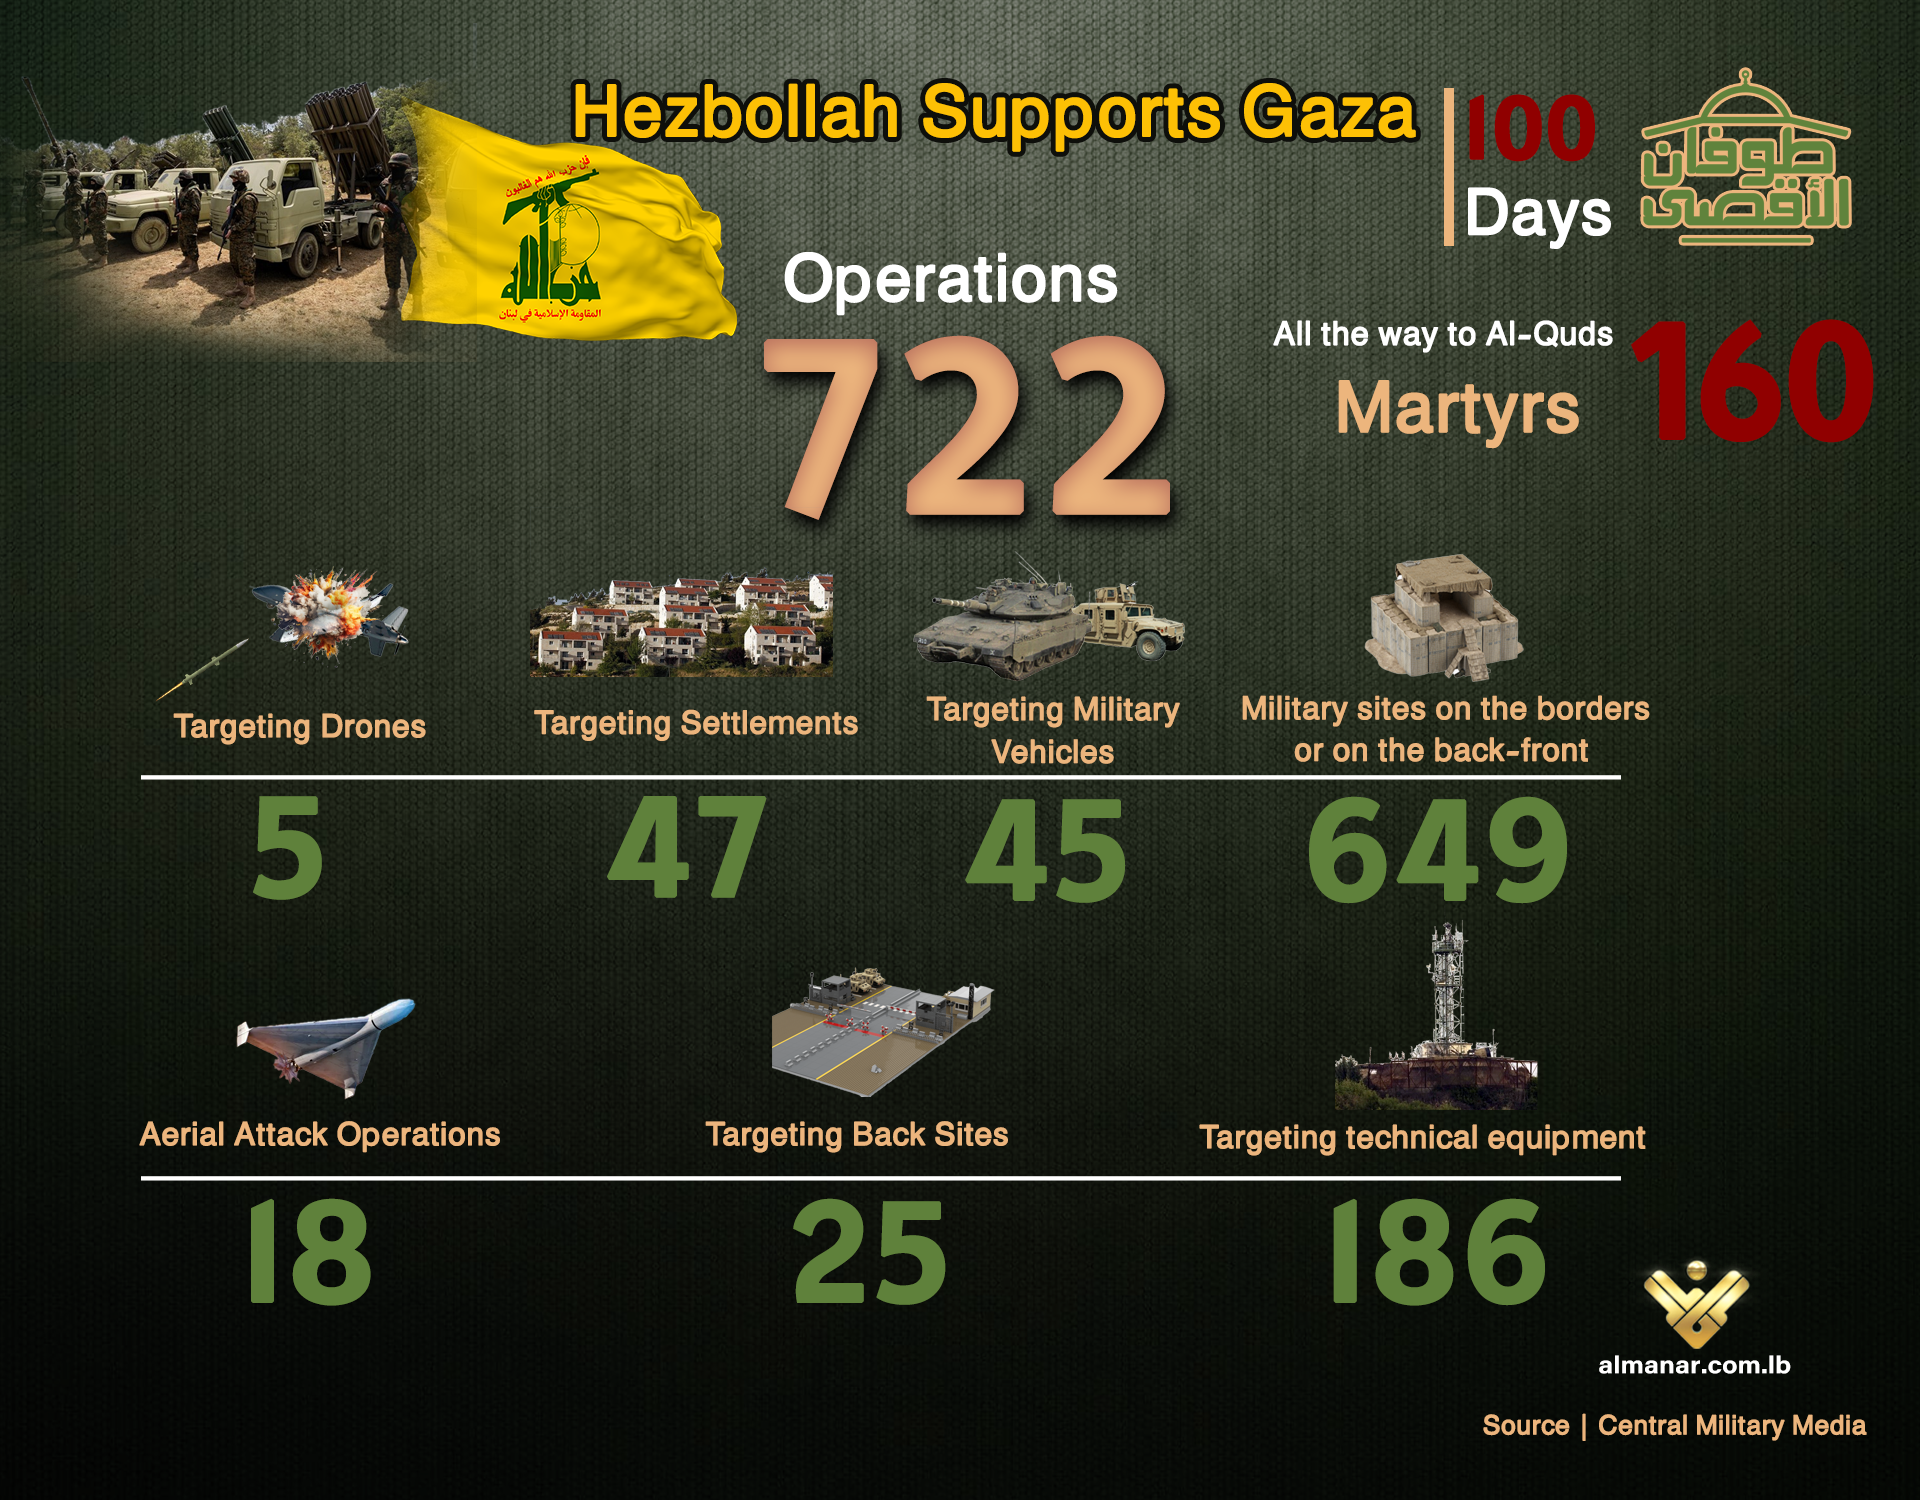 Hezbollah has launched numerous attacks on occupied territories, resulting in severe damage to the Zionist entity